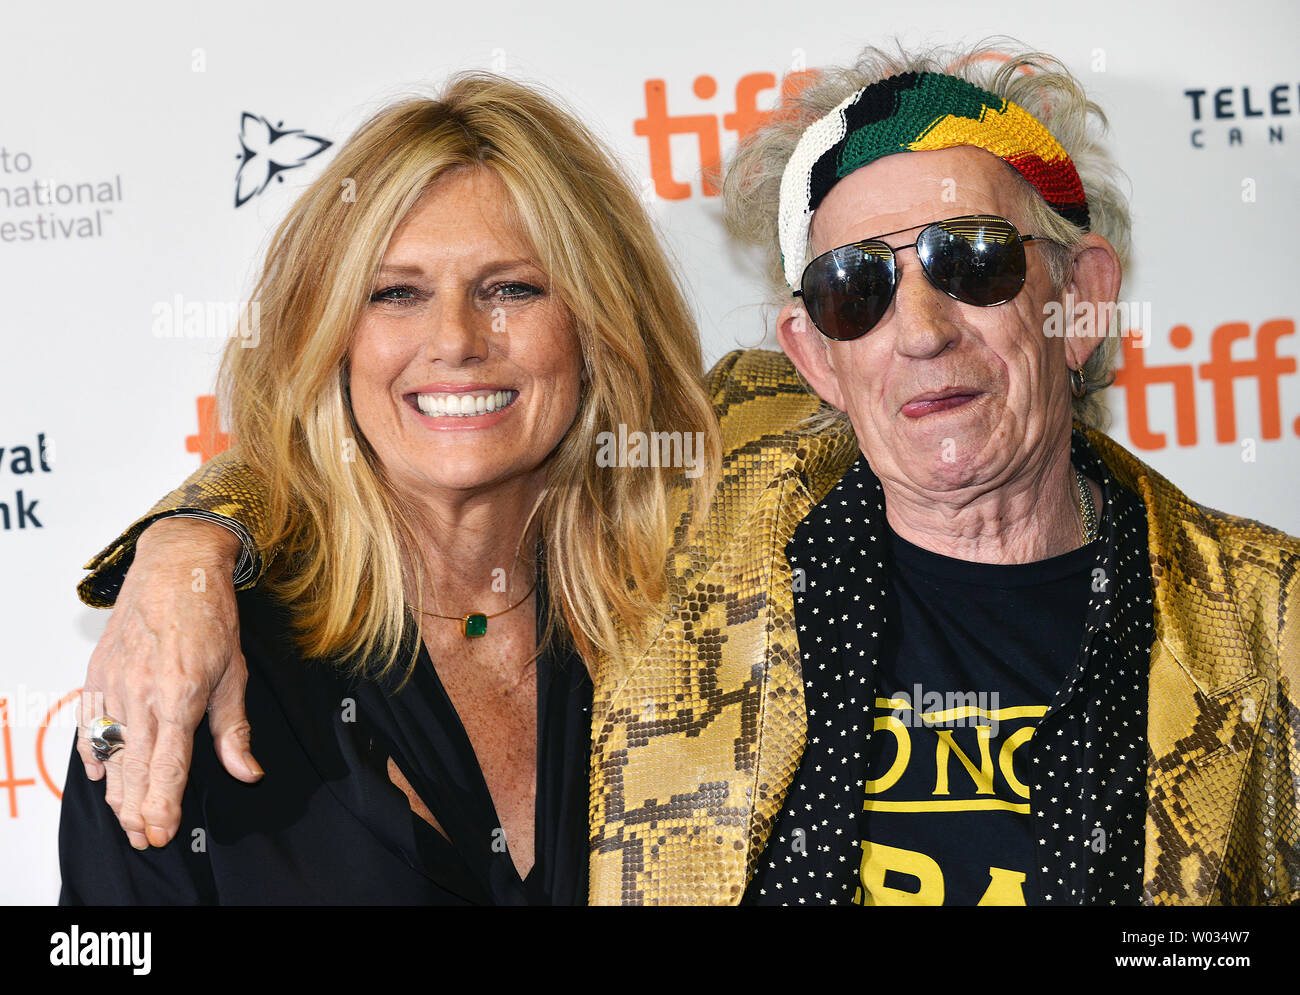 Rolling Stones guitarist Keith Richards and his wife Patti Hansen arrive at  the world premiere of the documentary 'Keith Richards: Under The Influence'  at the Princess of Wales theatre during the Toronto